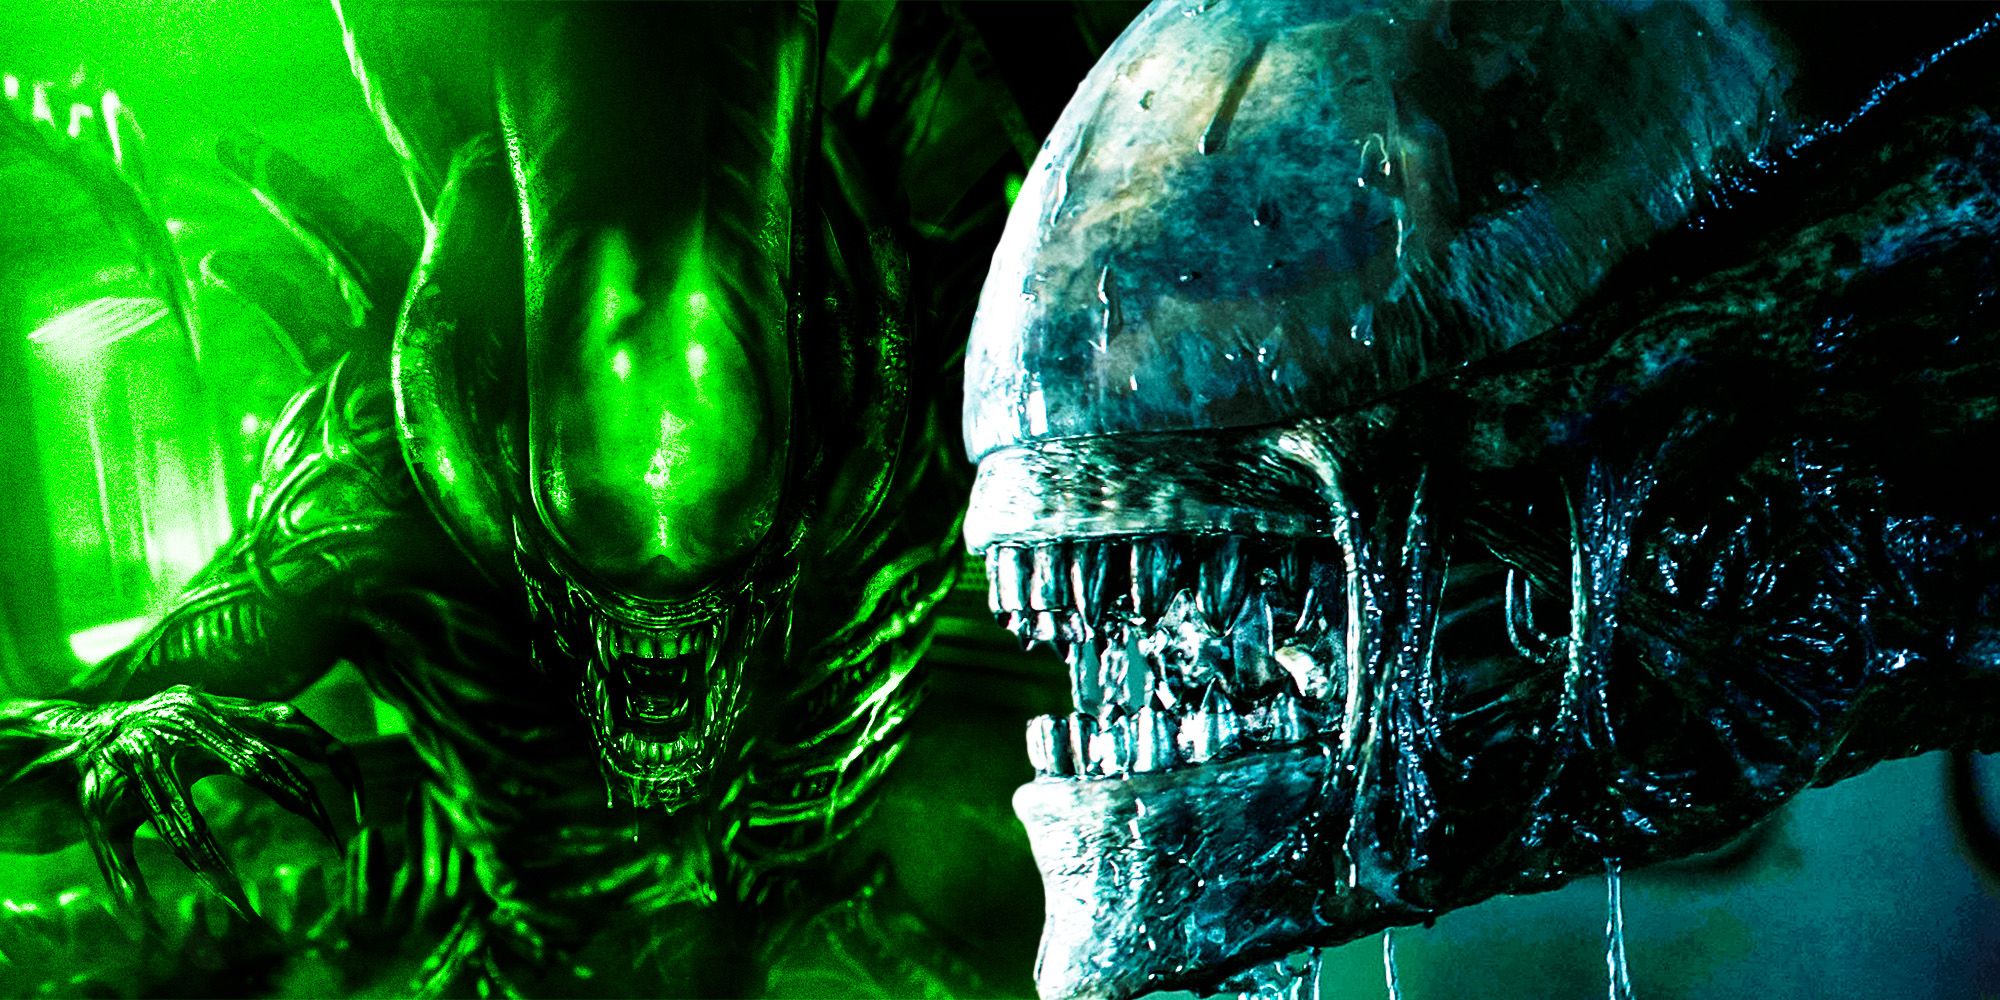 The Xenomorph from Alien and its sequels.